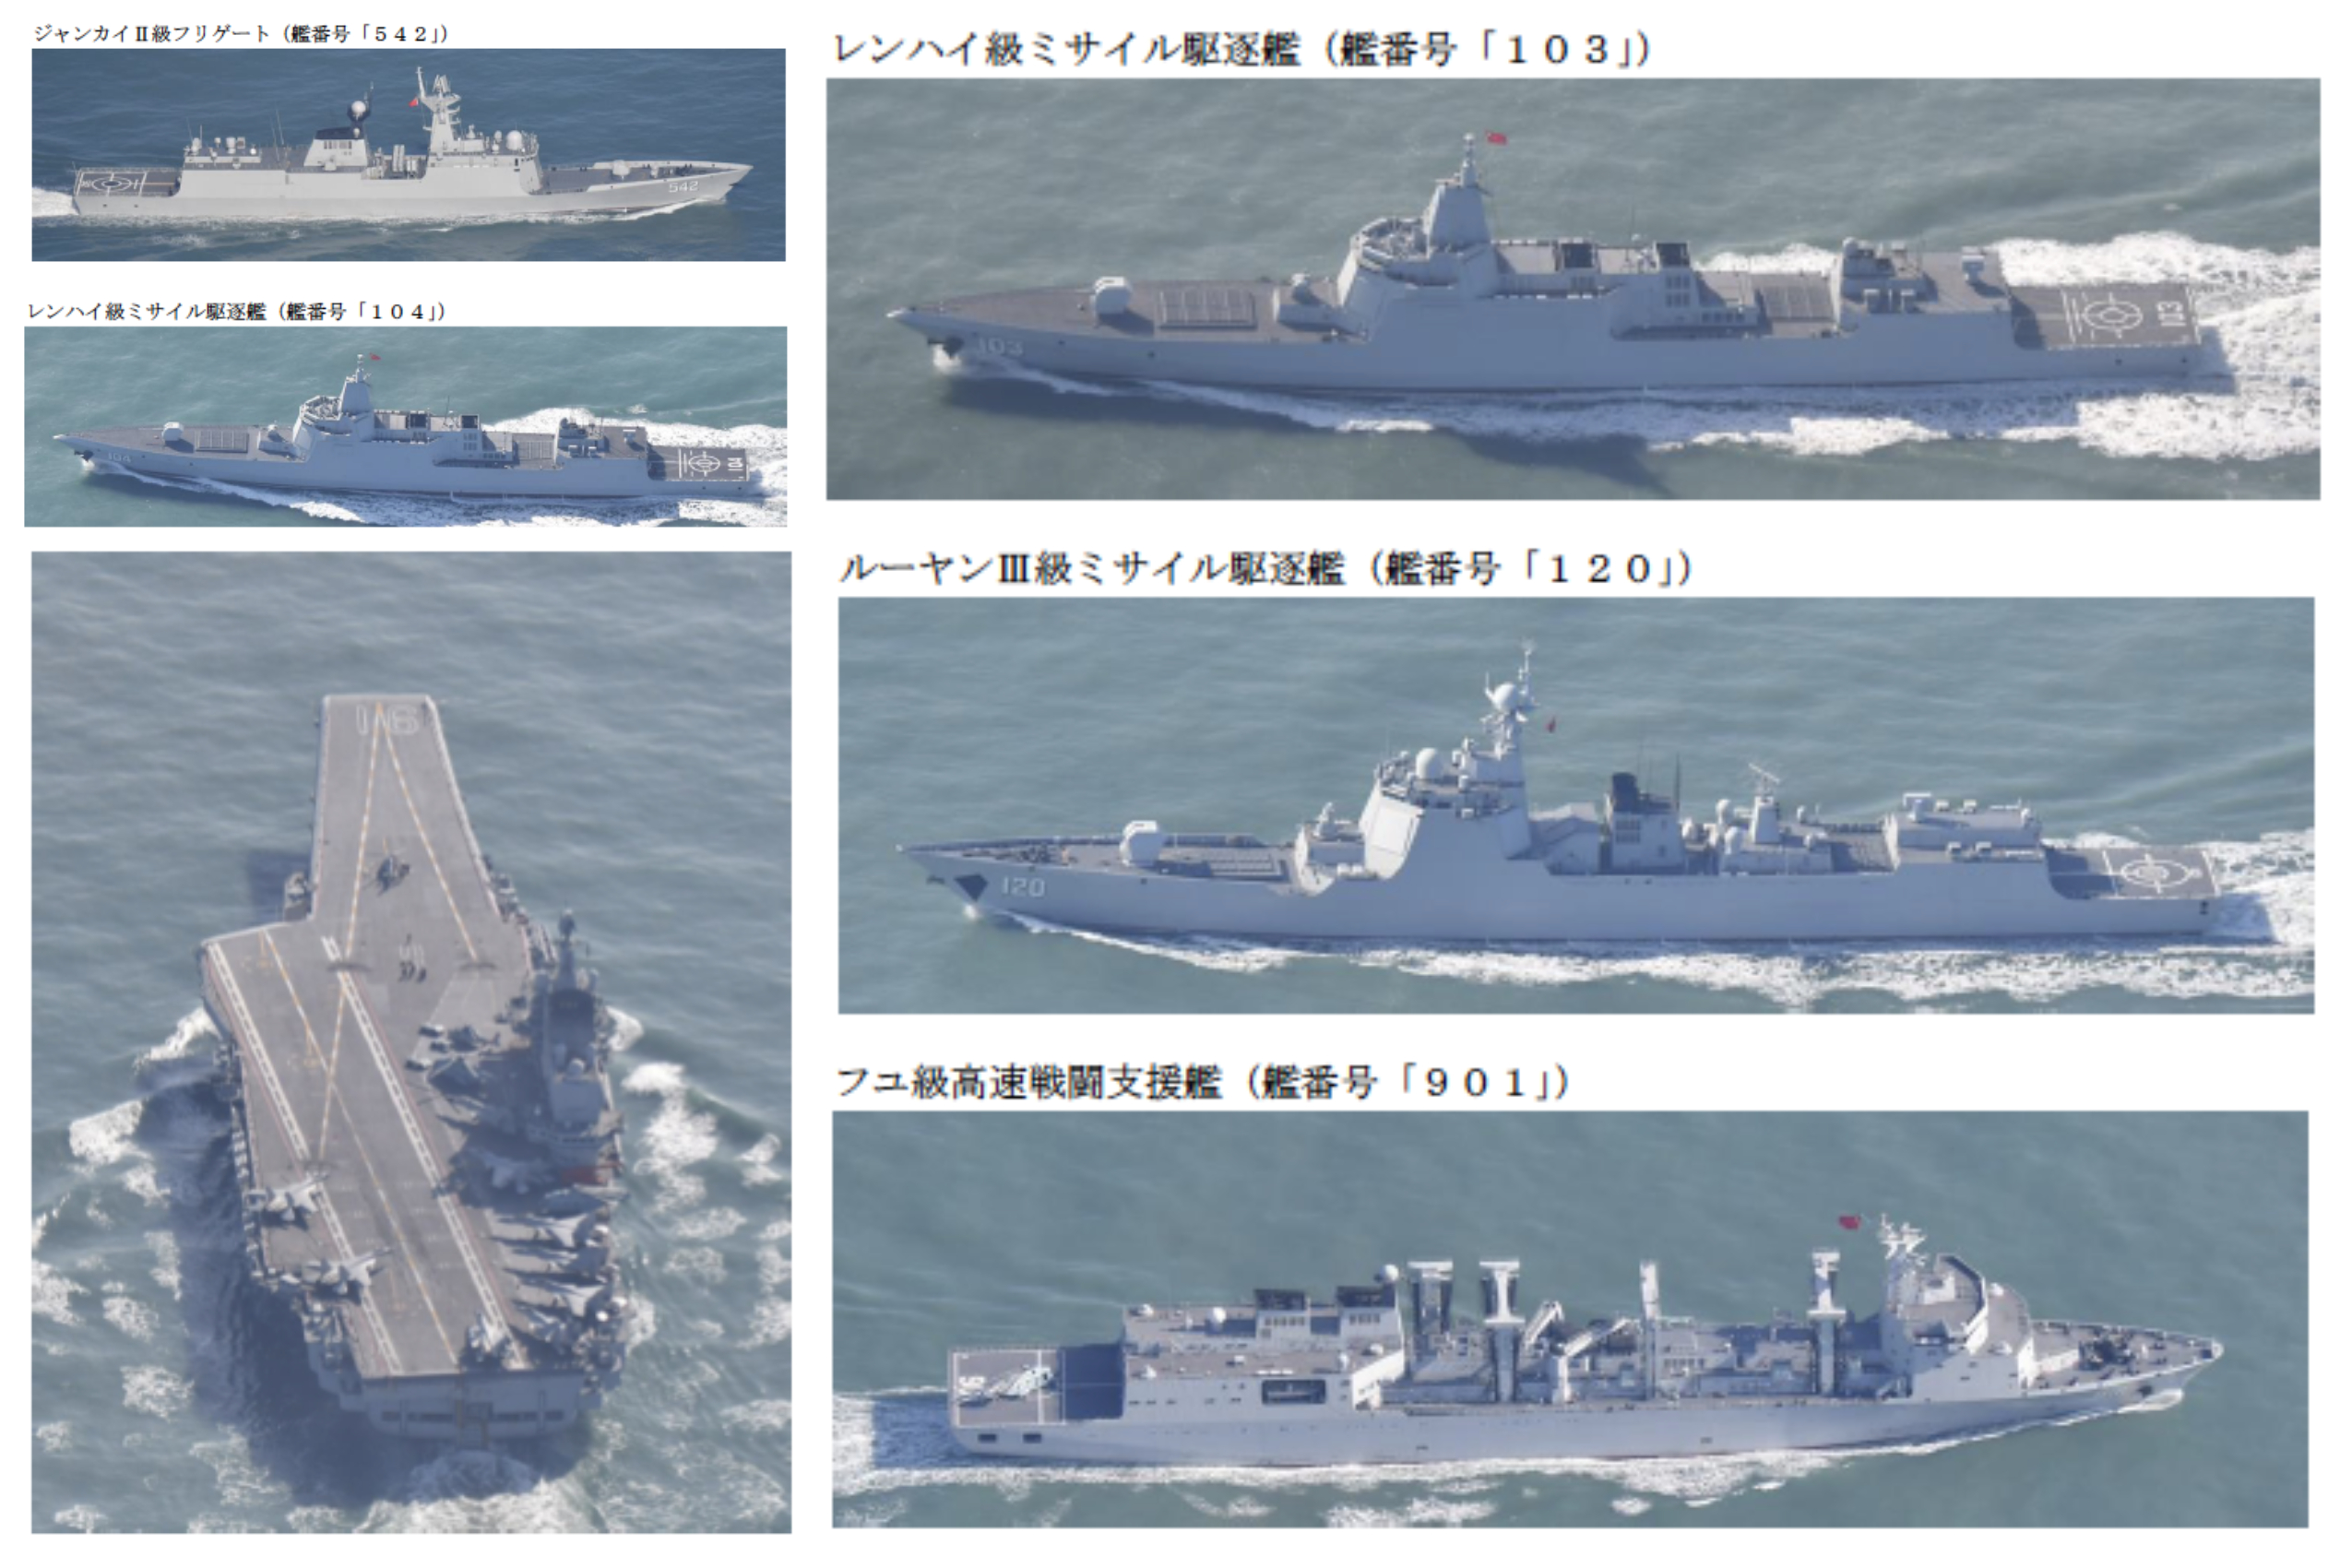 Chinese Liaoning Carrier Strike Group Now Operating in the Philippine Sea